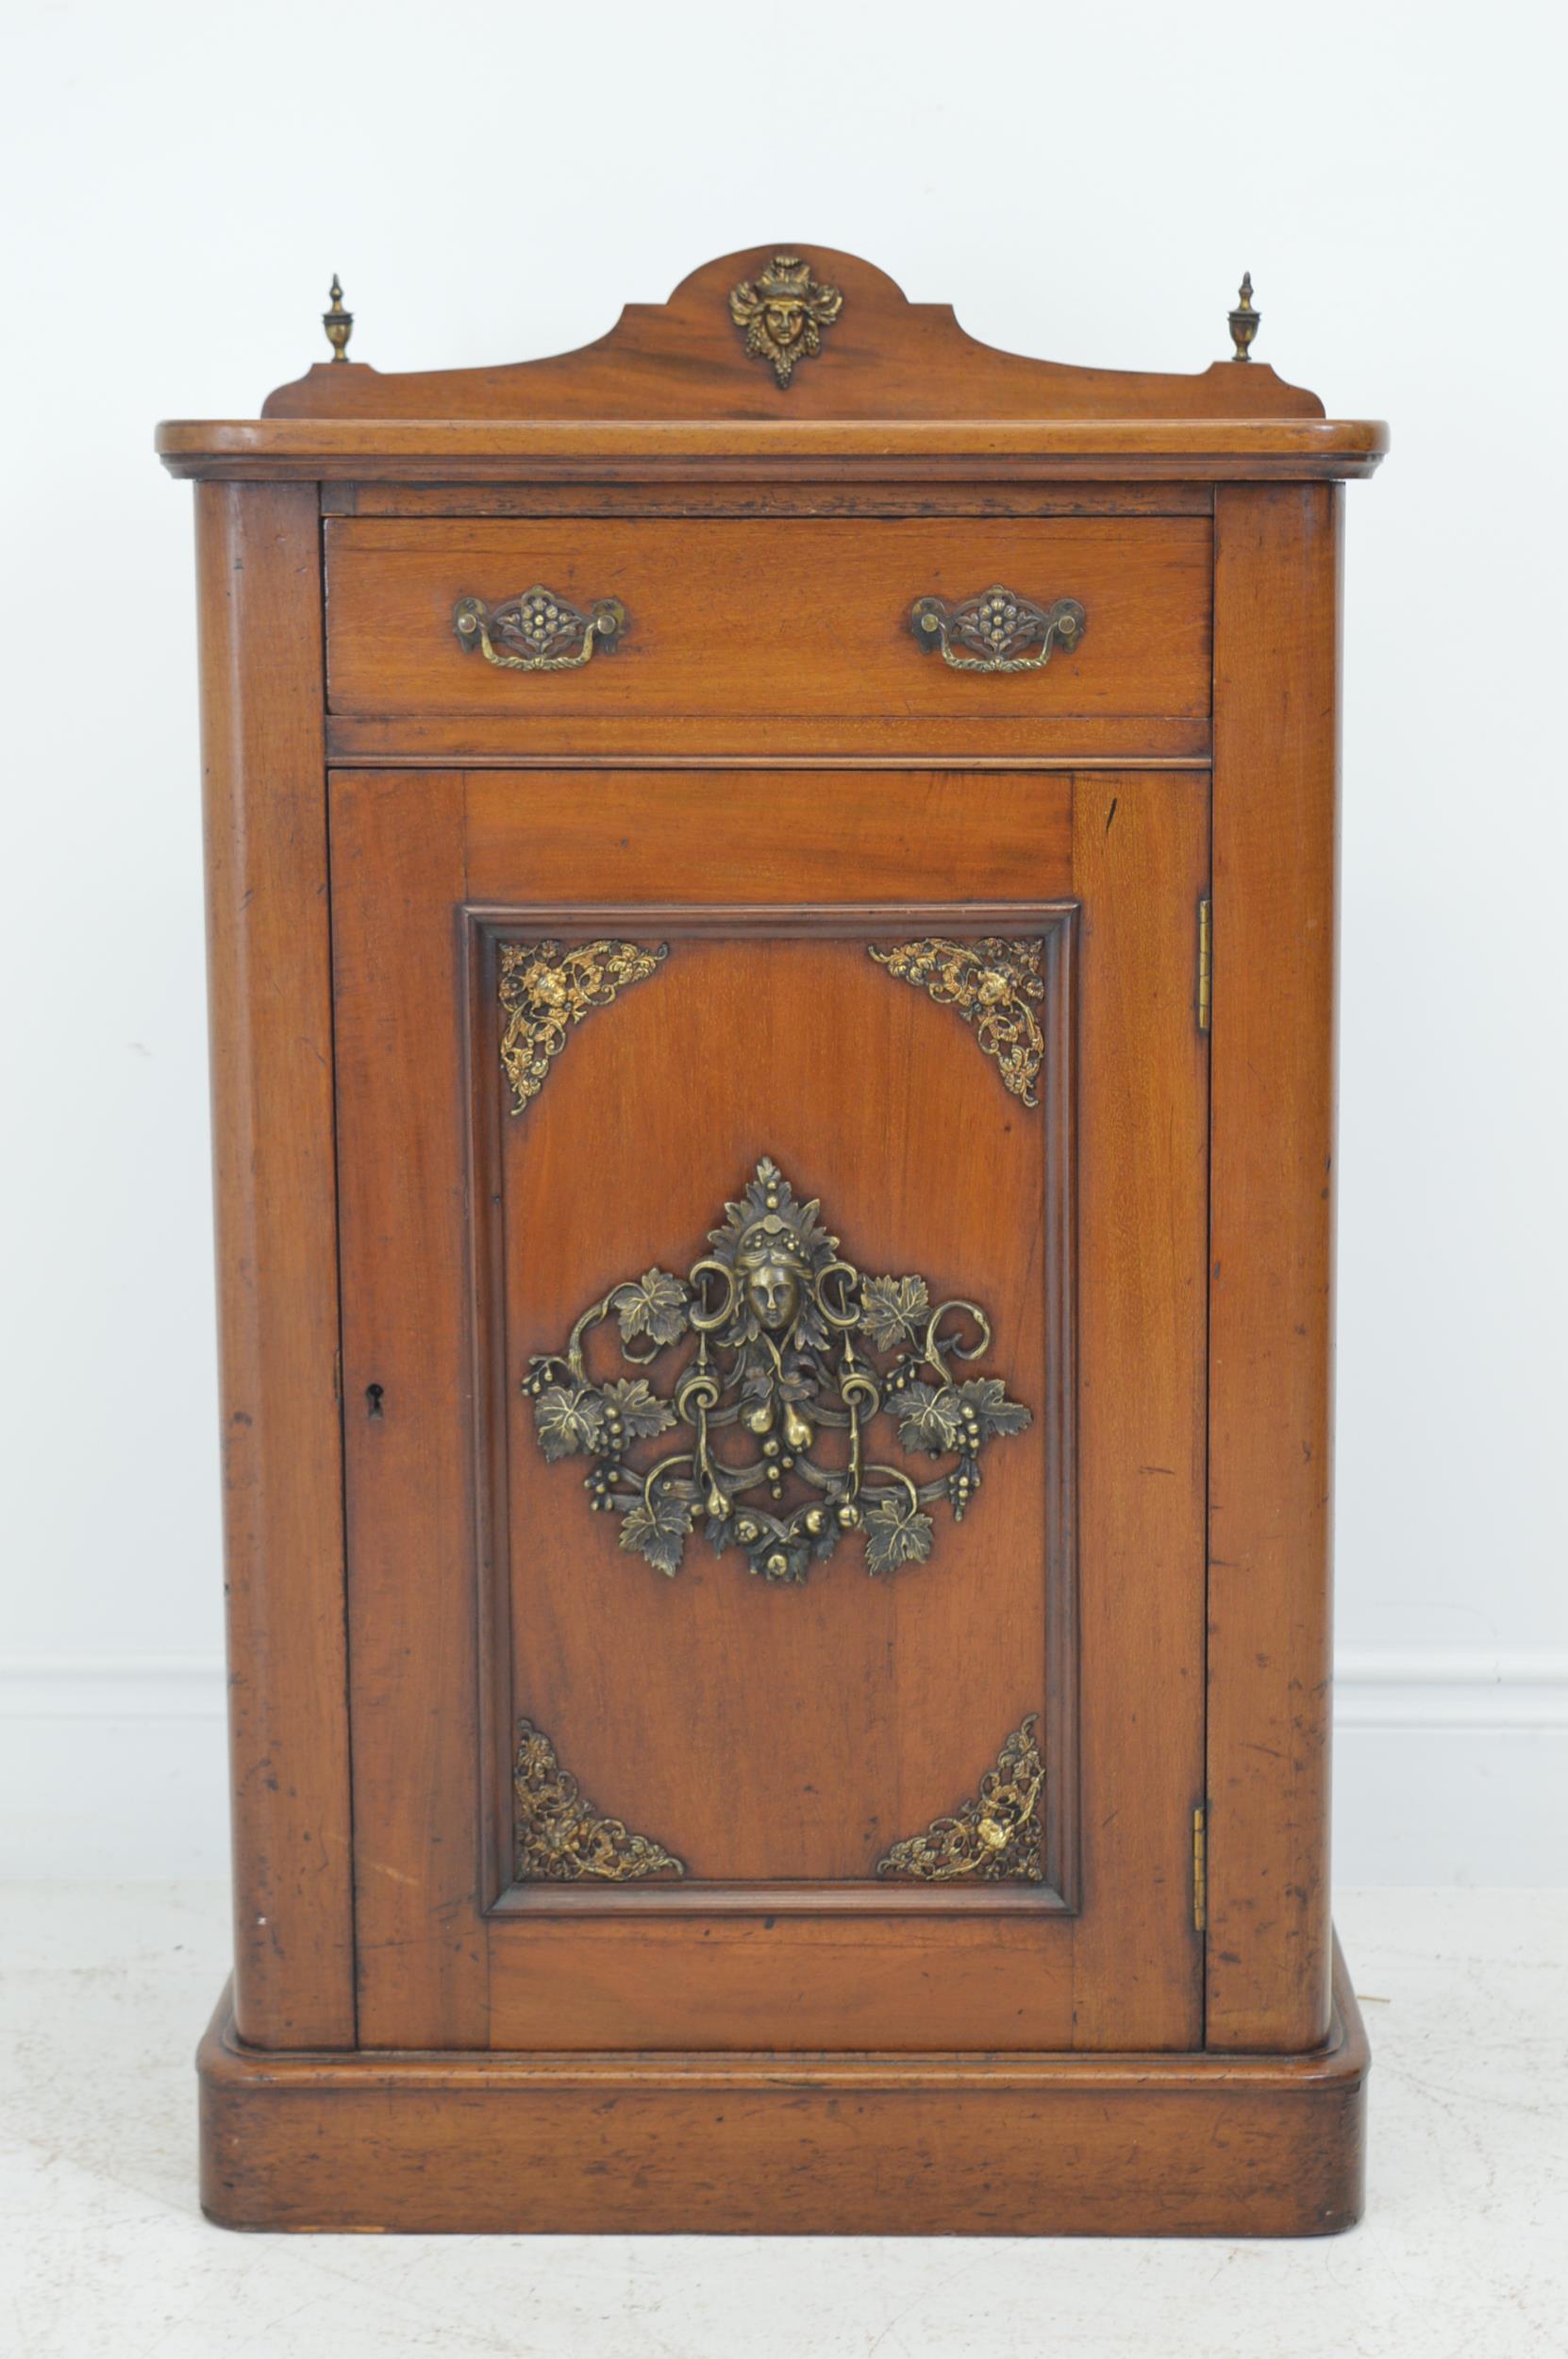 19th C. mahogany side cabinet with ormolou mounts and single drawer over blind door {105cm H x - Image 2 of 3